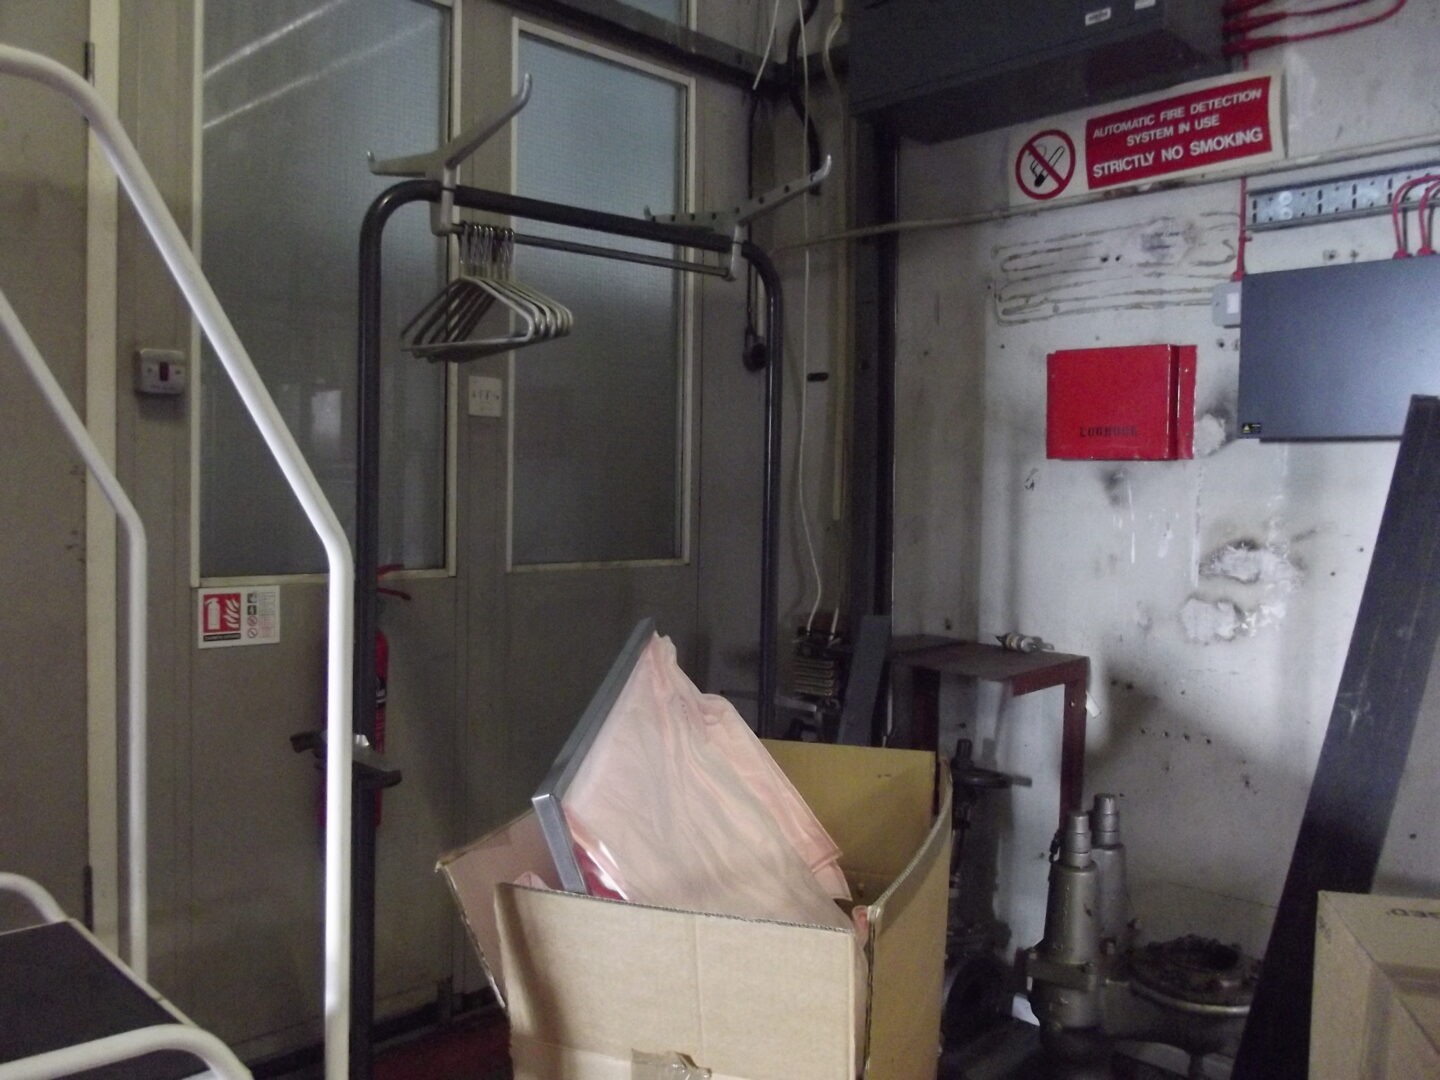 W401 air conditioning plant room, 24 Sep 2011